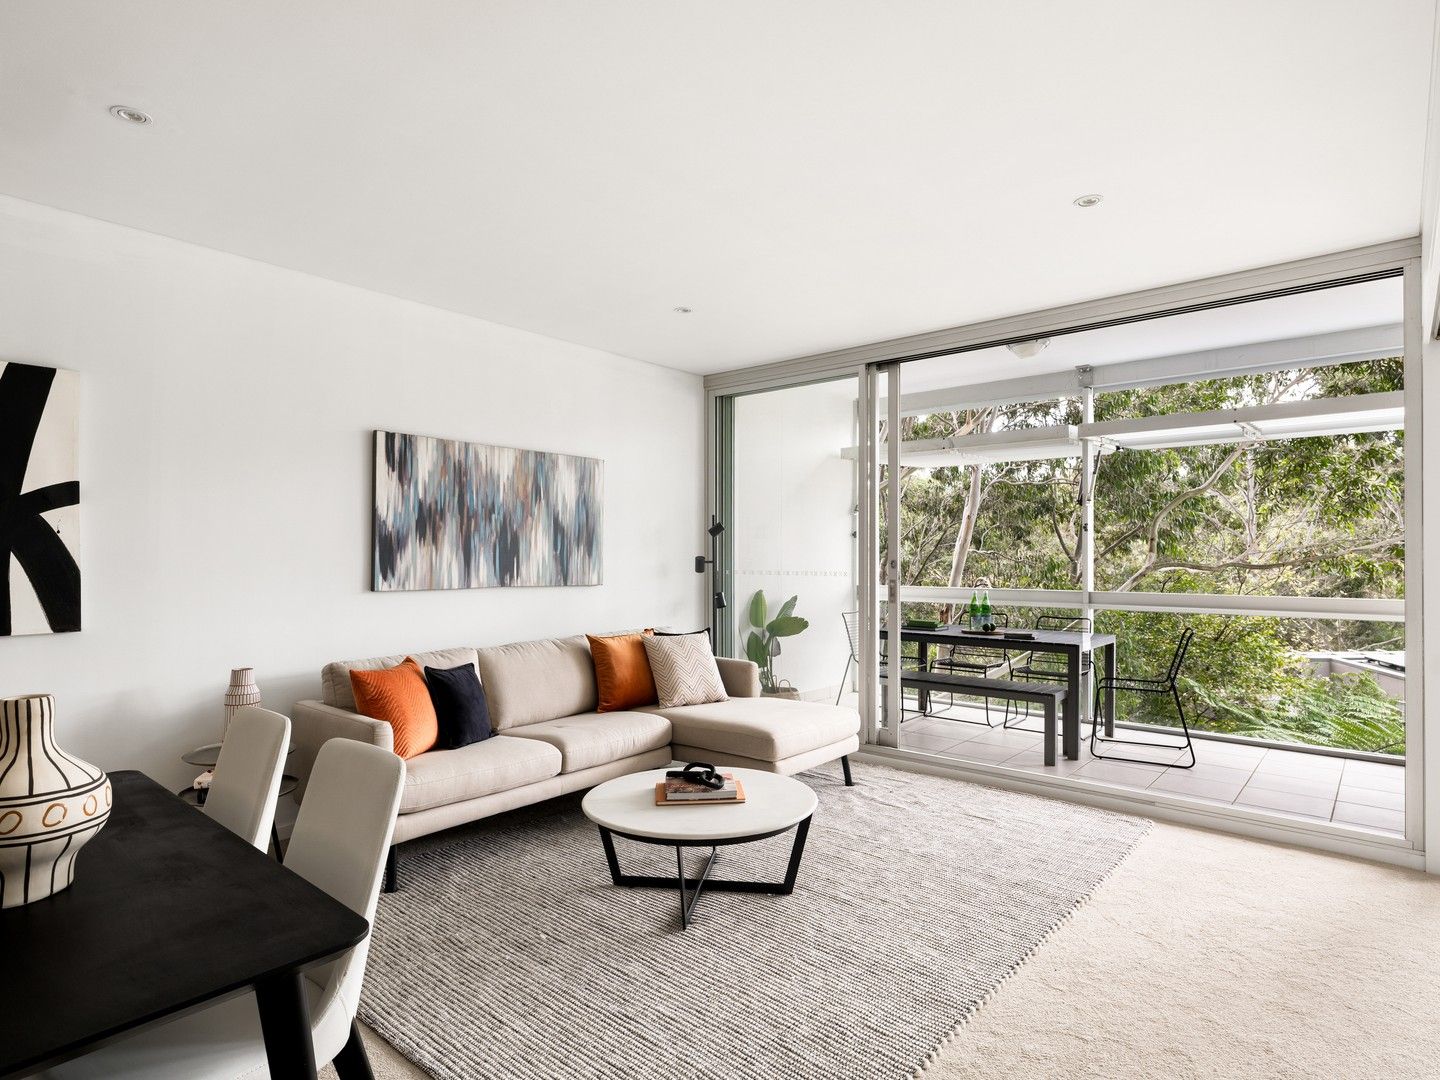 2 bedrooms Apartment / Unit / Flat in 22/4 Alexandra Drive CAMPERDOWN NSW, 2050